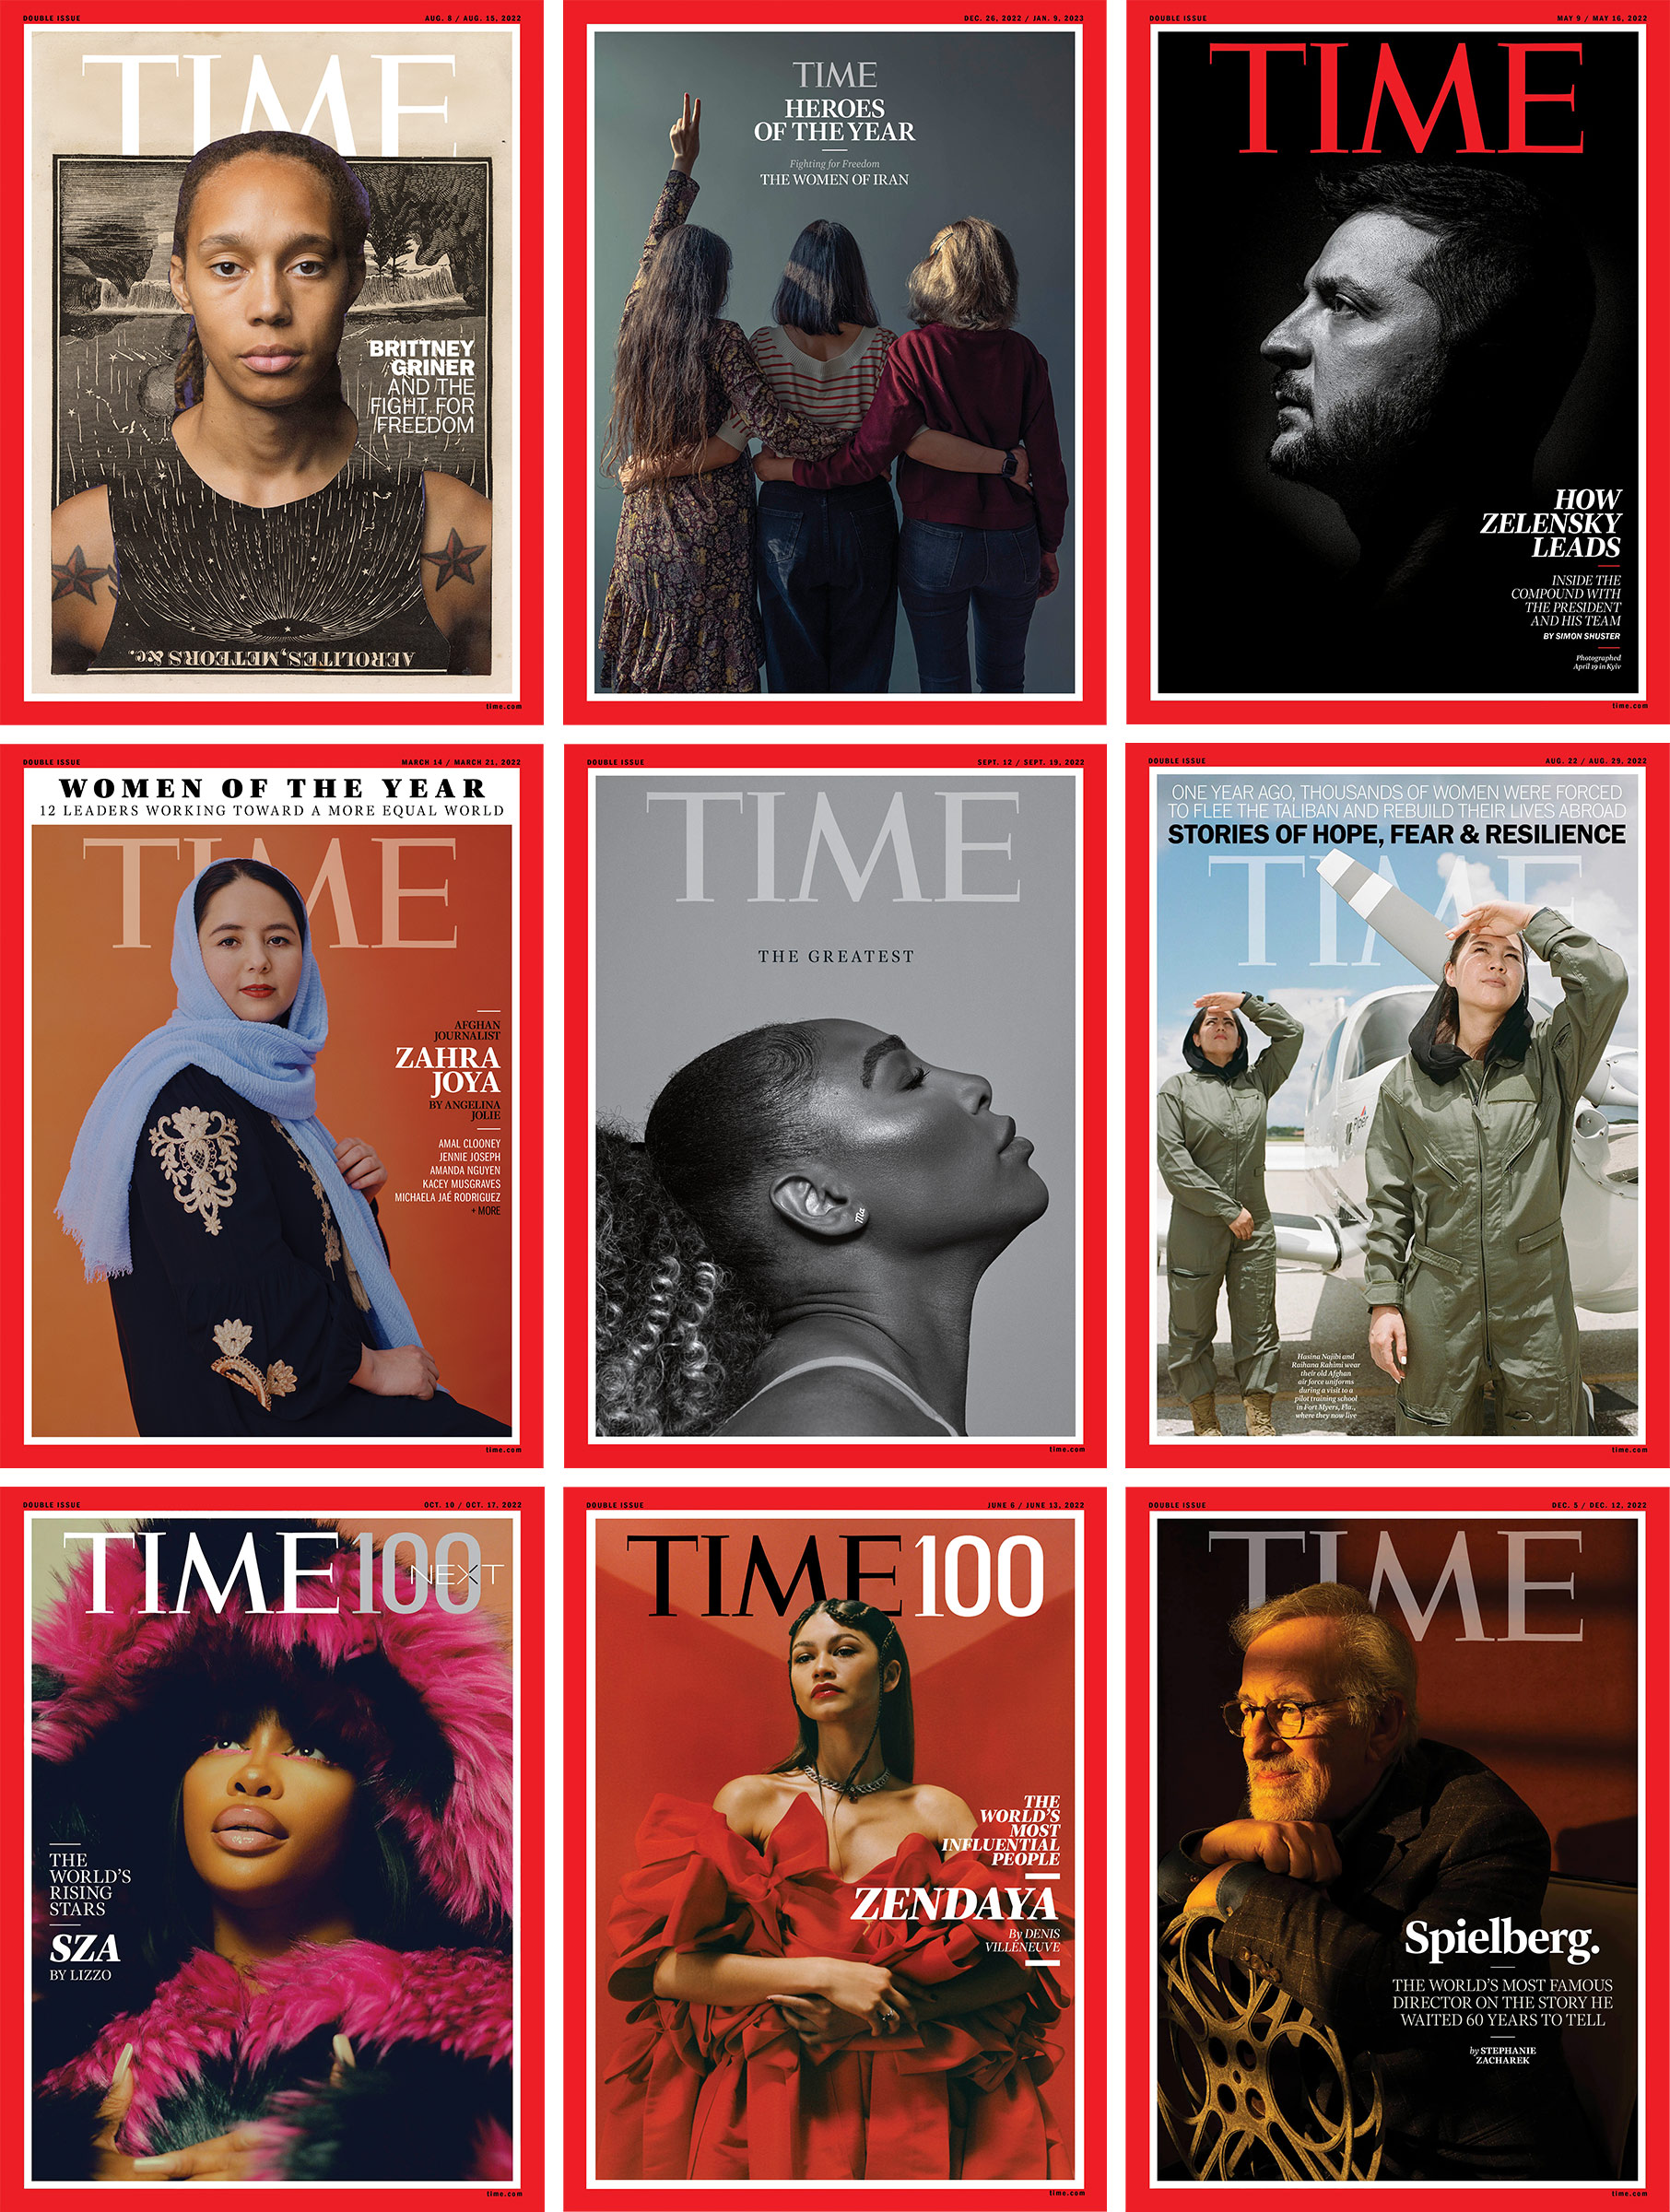 From left, top row: Lorna Simpson for TIME, Forough Alaei for TIME, Alexander Chekmenev for TIME; Middle row: Kristina Varaksina for TIME, Paola Kudacki for TIME, Sabiha Çimen—Magnum Photos for TIME; Bottom row: Kanya Iwana for TIME, Camila Falquez for TIME, Tania Franco Klein for TIME